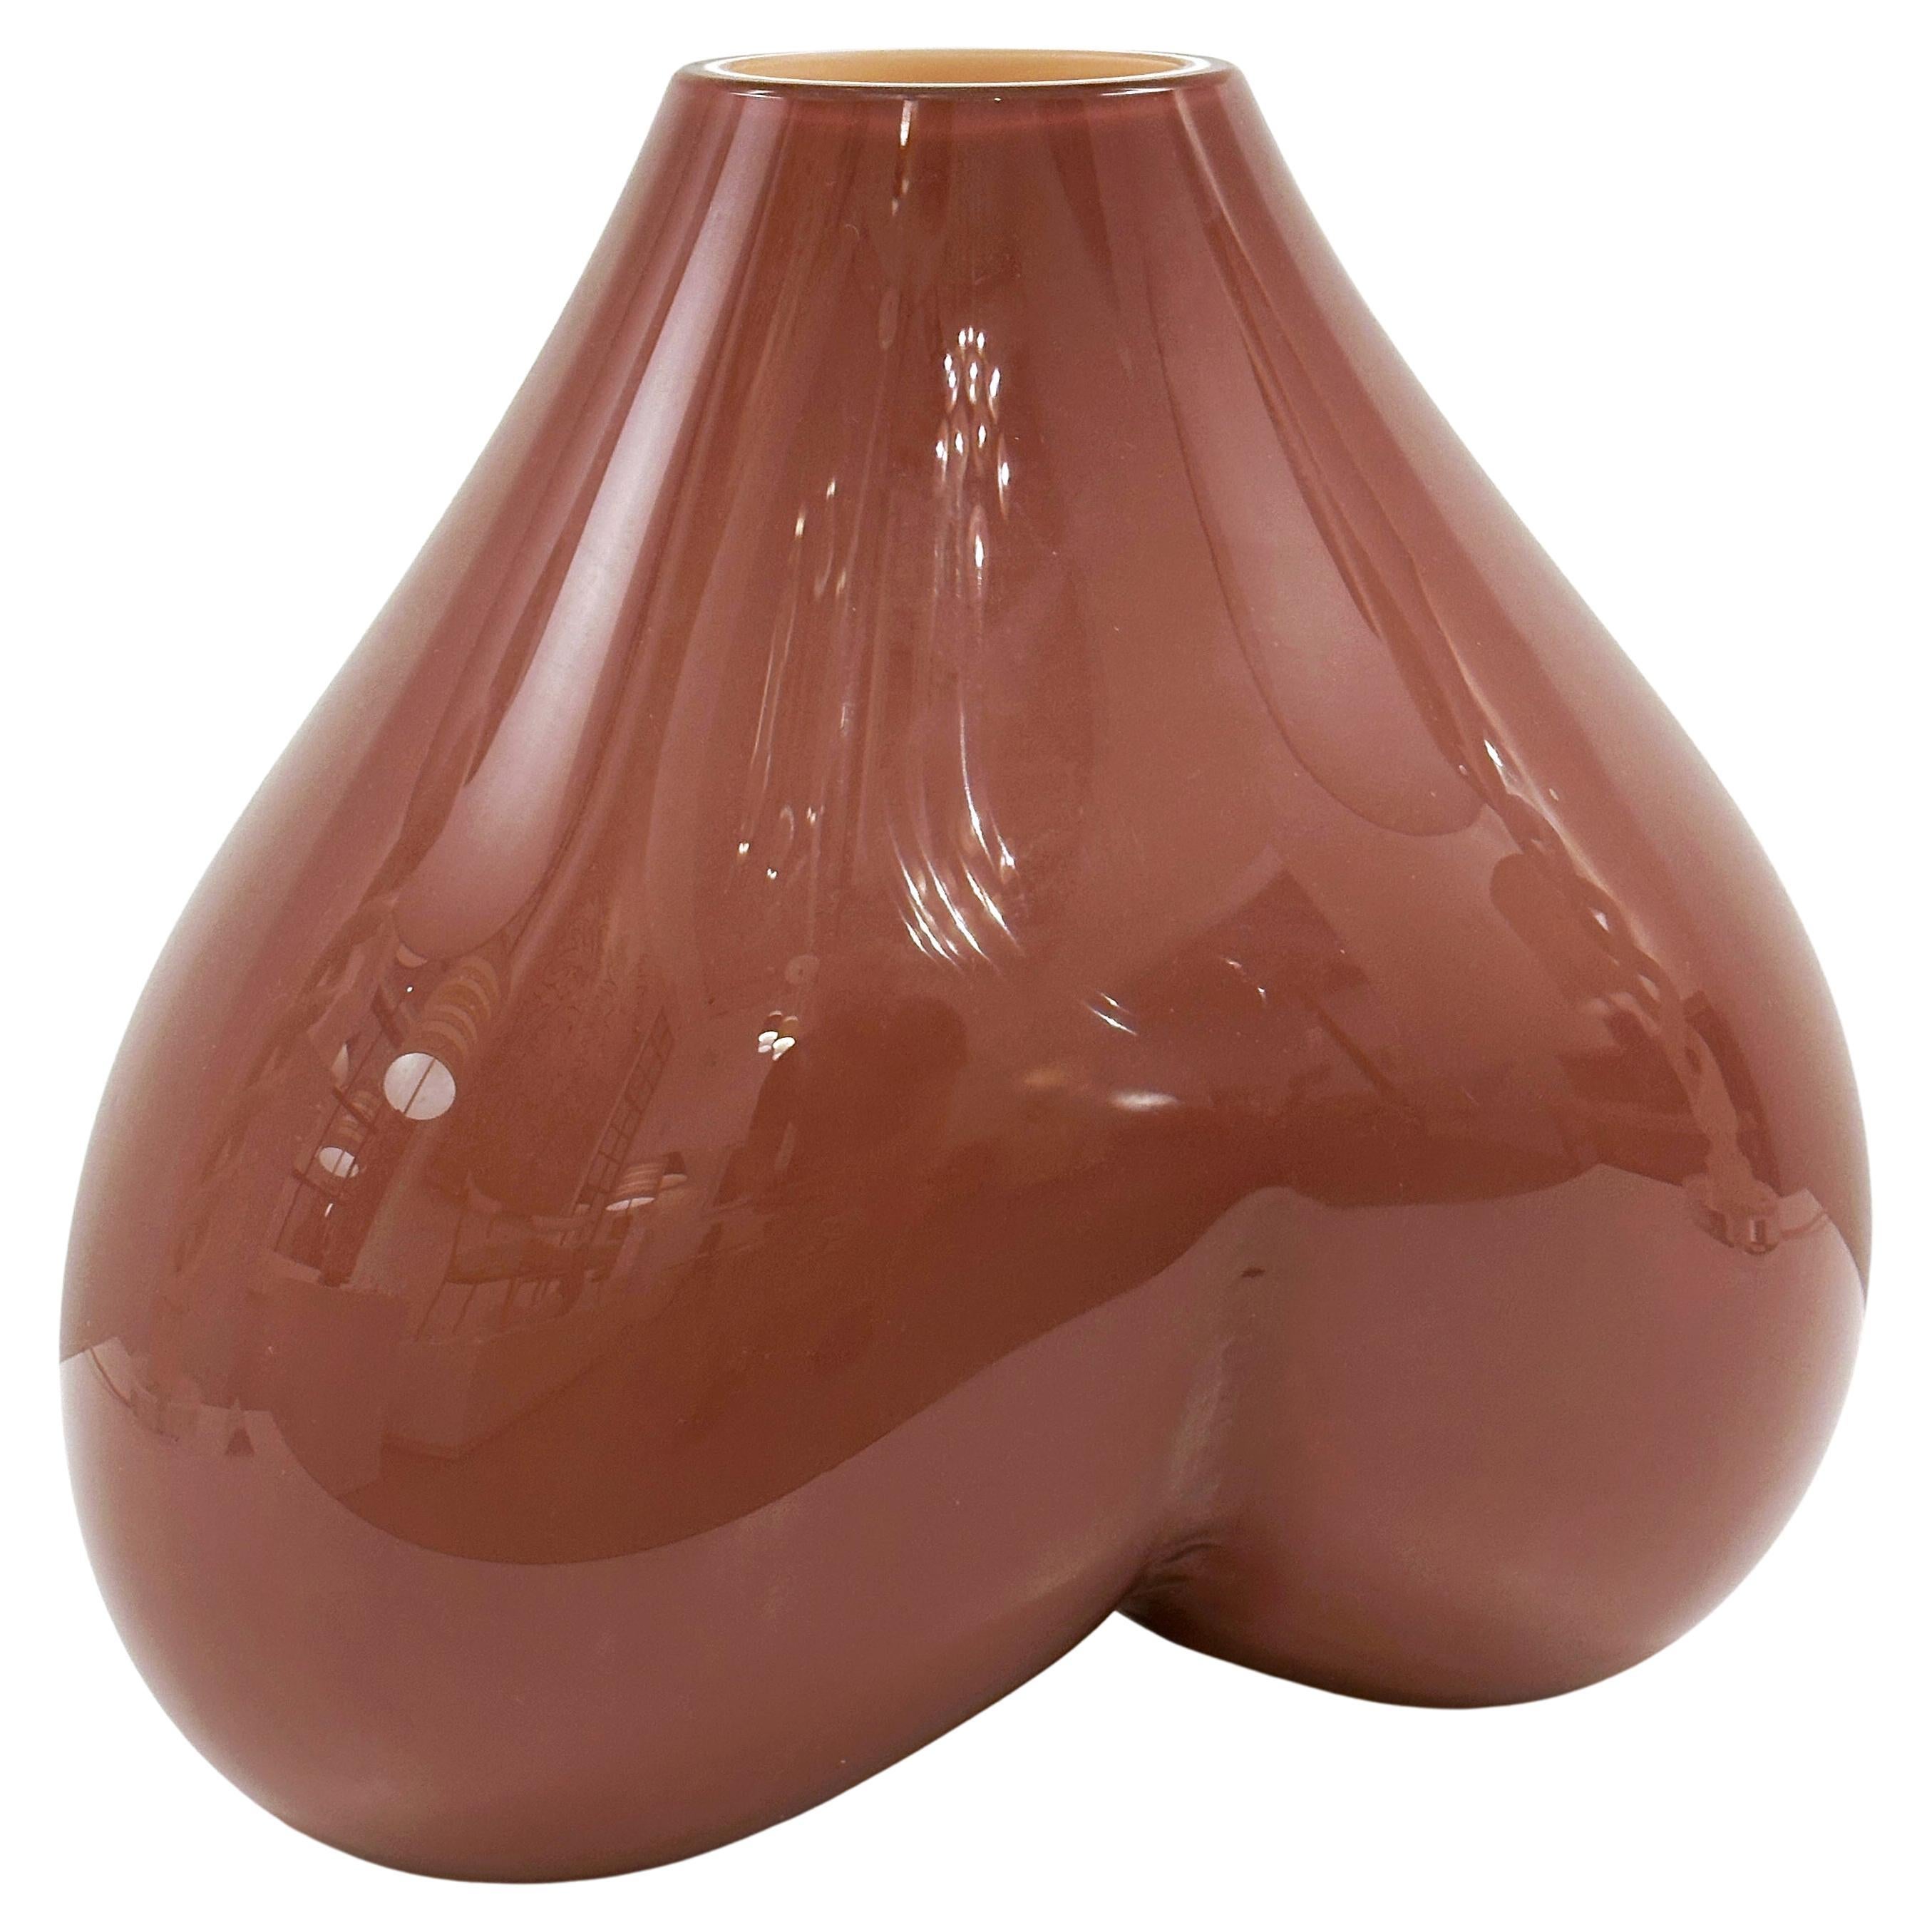 Marre Moerel Anatomy Series Signed Edition Gluteus Murano Glass Vase Covo, Italy